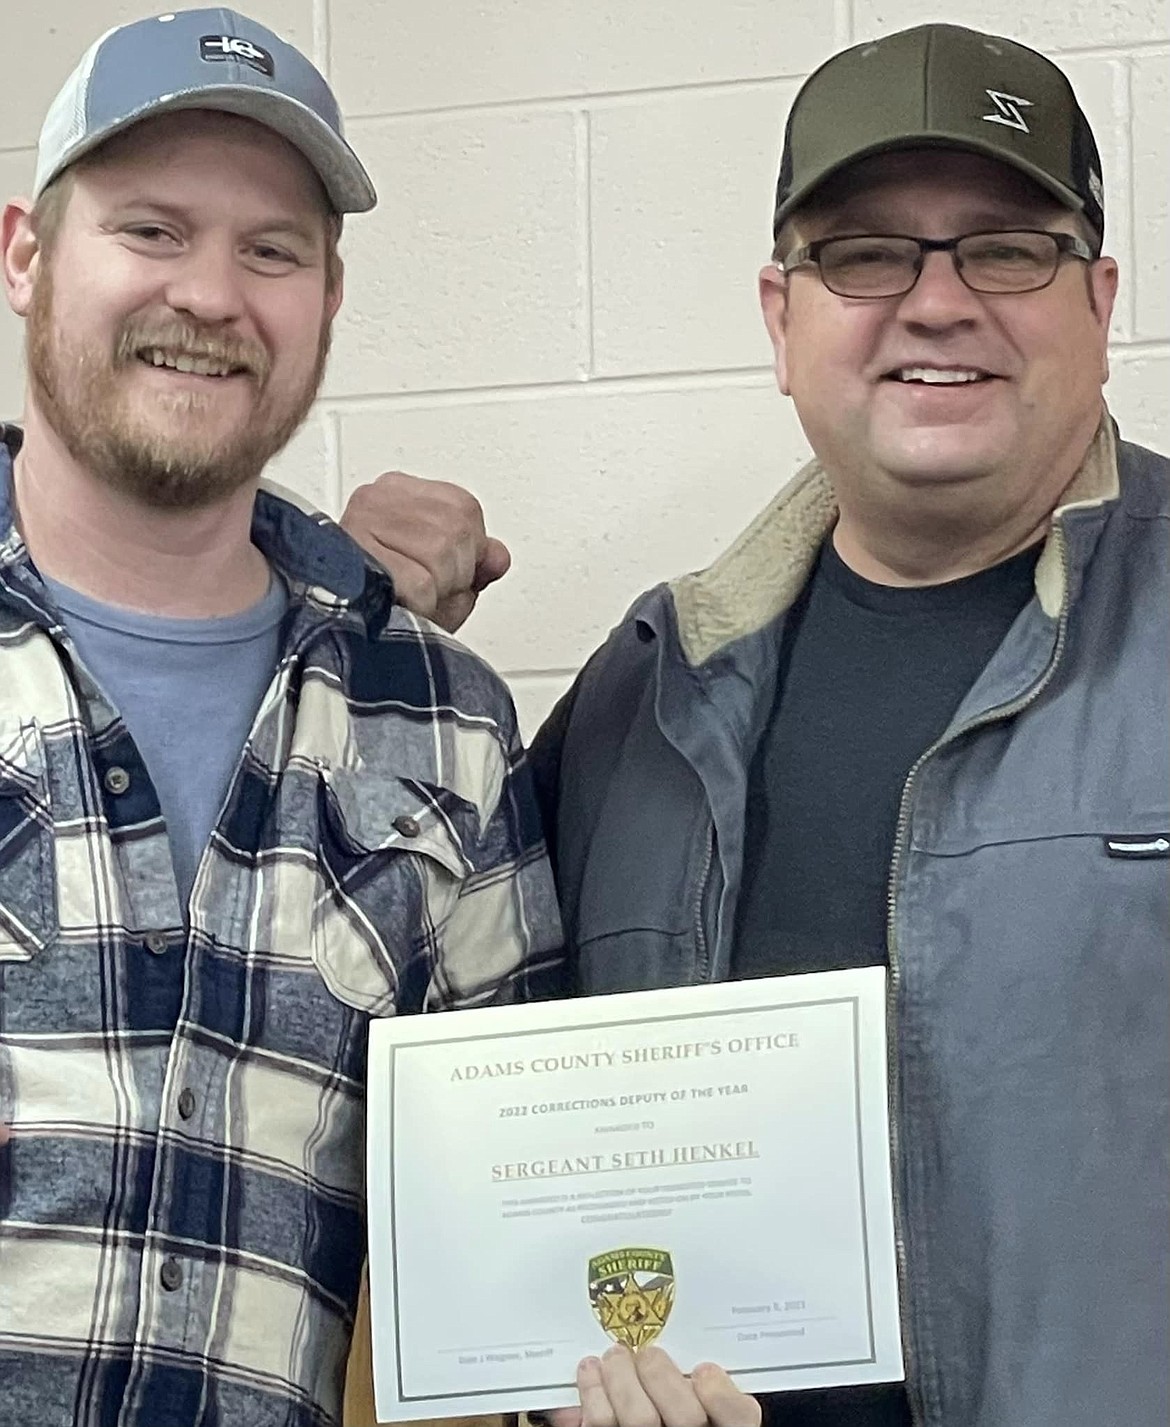 Seth Hinkle, left, received the Adams County Sheriff’s Office corrections deputy of the year award from Sheriff Dale Wagner at the ACSO awards dinner.